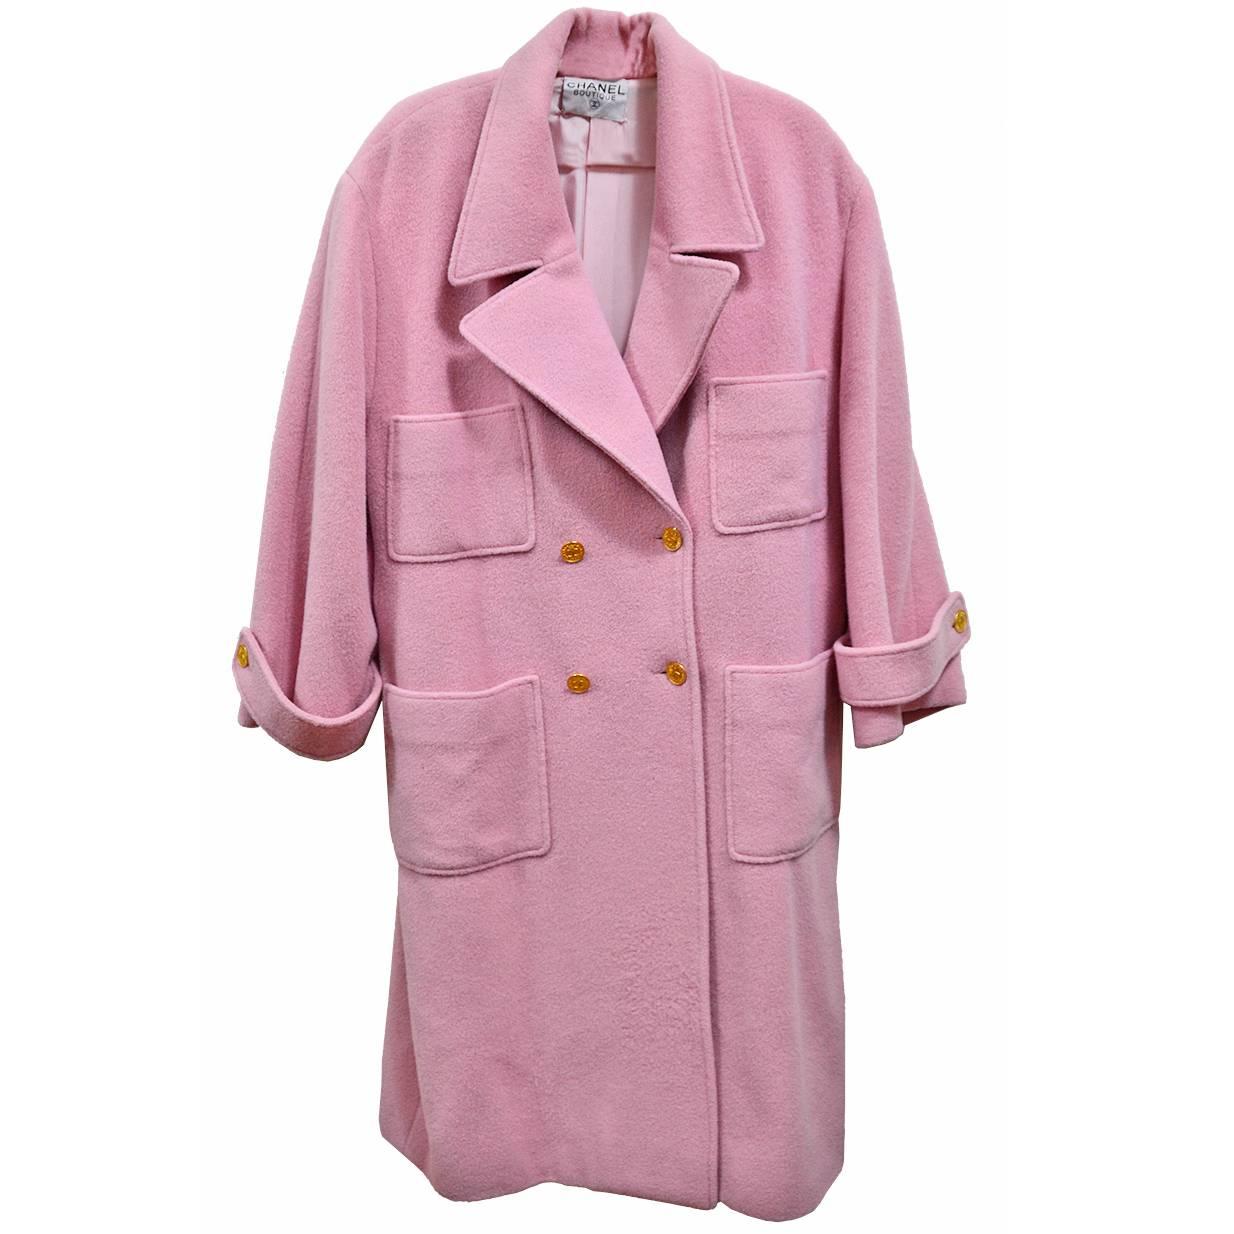 Gorgeous Pink Chanel Full Length Wool & Cashmere Coat For Sale